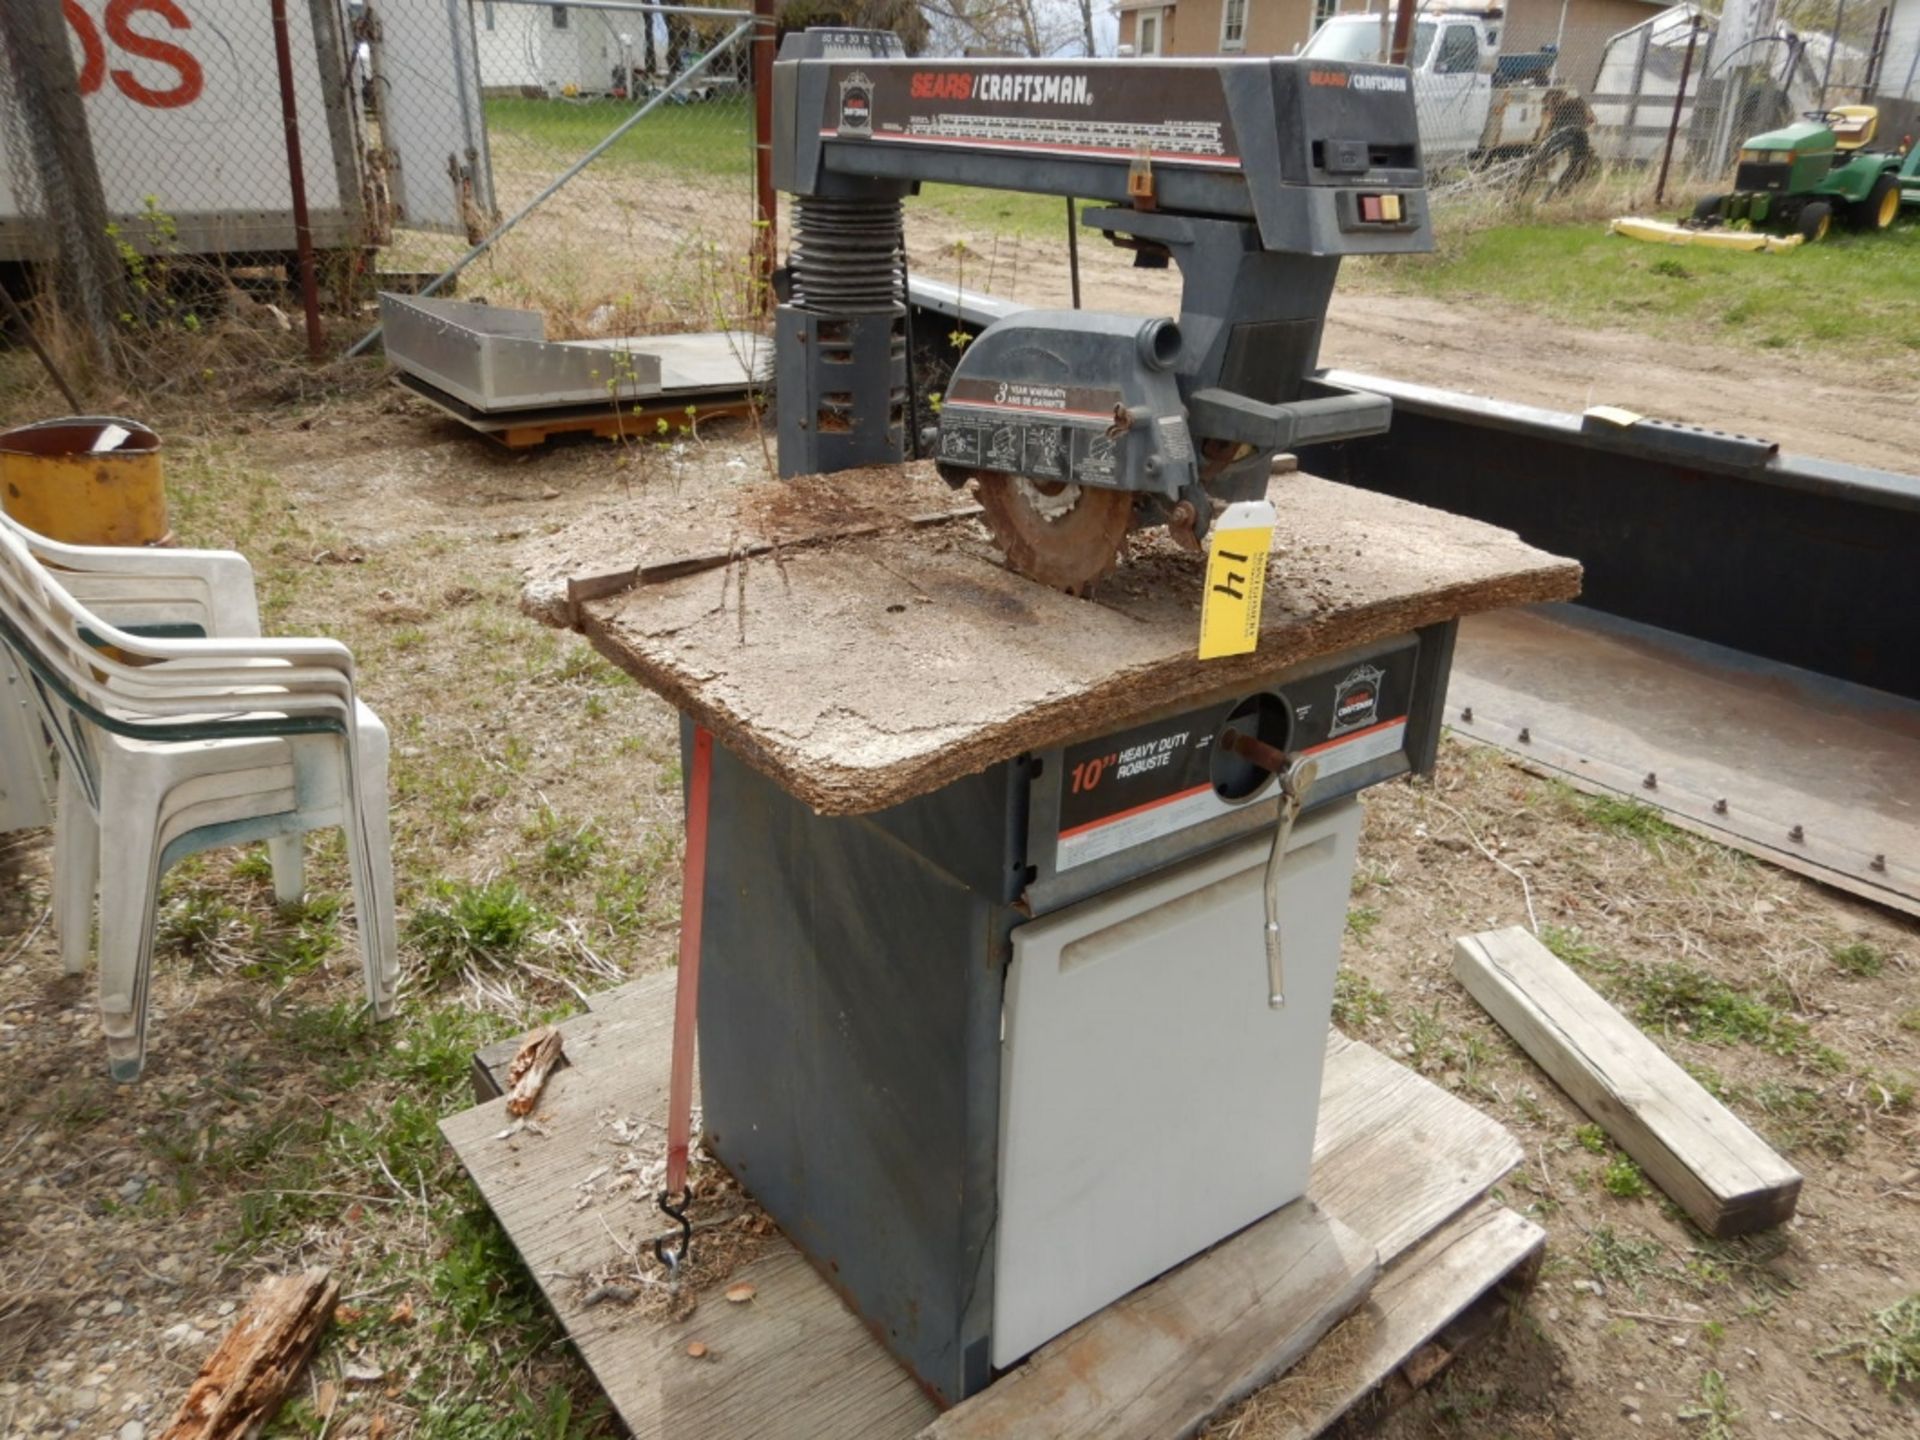 SEARS 10INCH HD RADIAL ARM SAW - Image 2 of 4